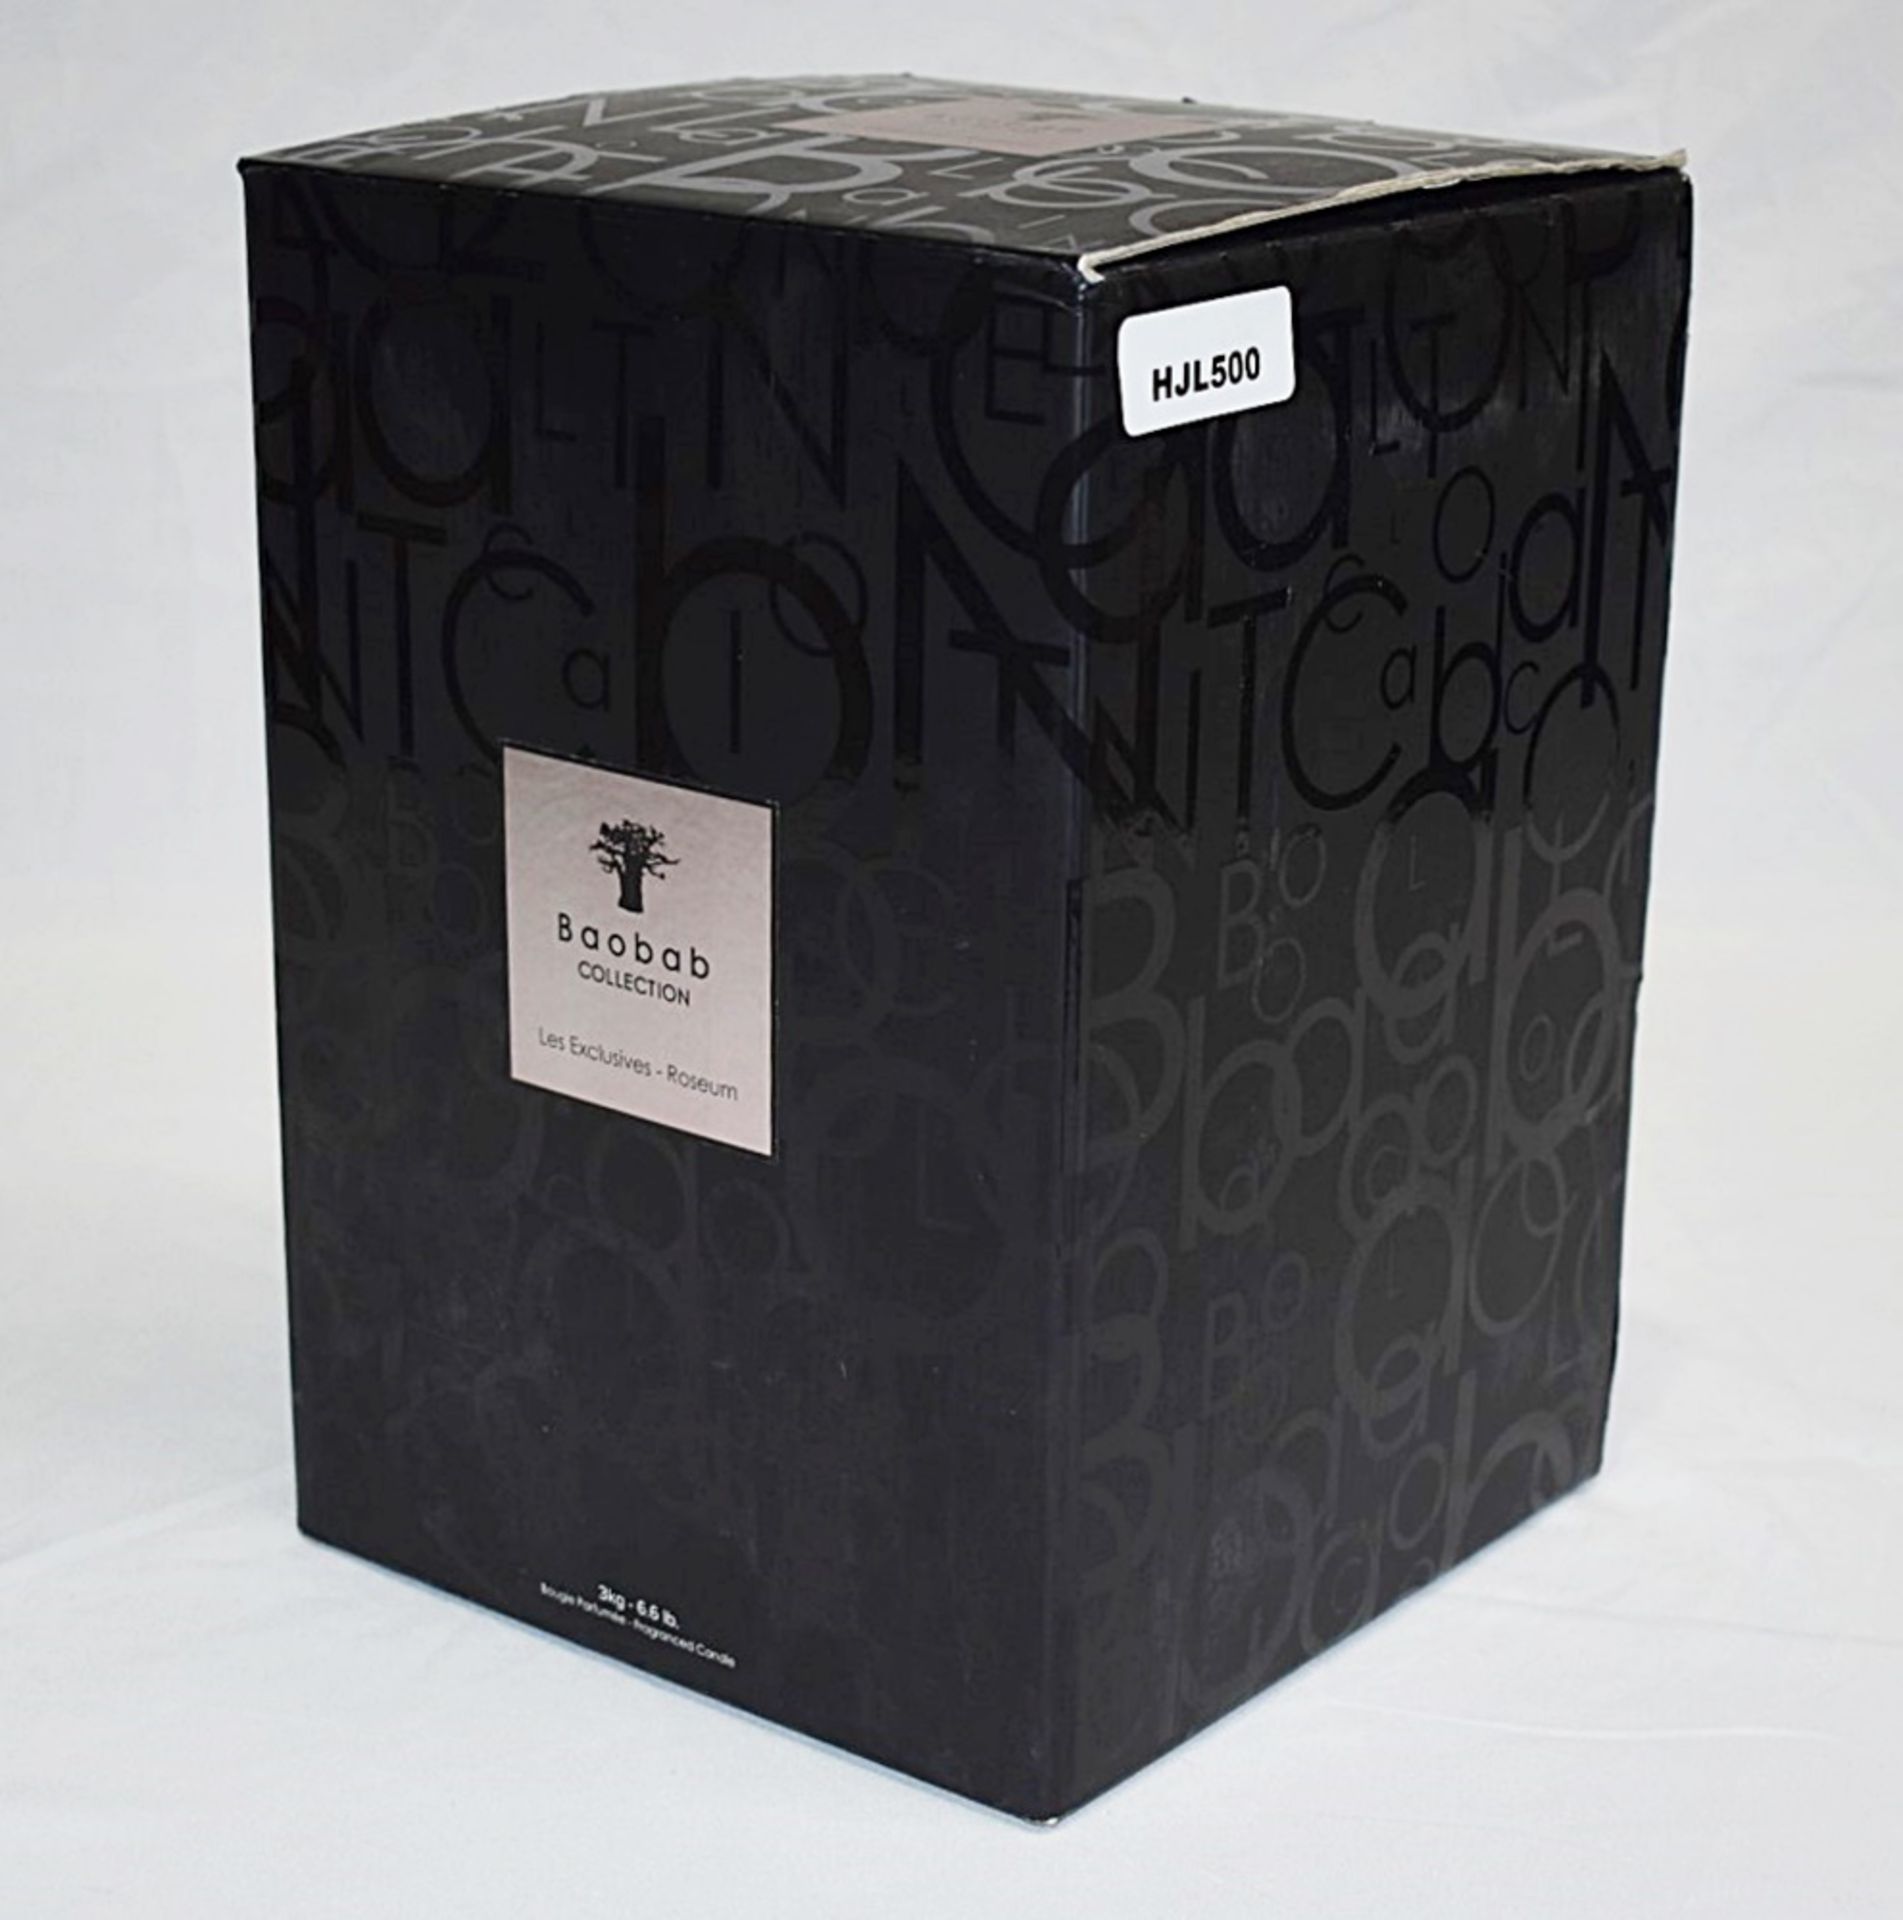 1 x BAOBAB COLLECTION Les Exclusives Roseum Candle (6kg) - Original Price £235.00 - Image 2 of 13